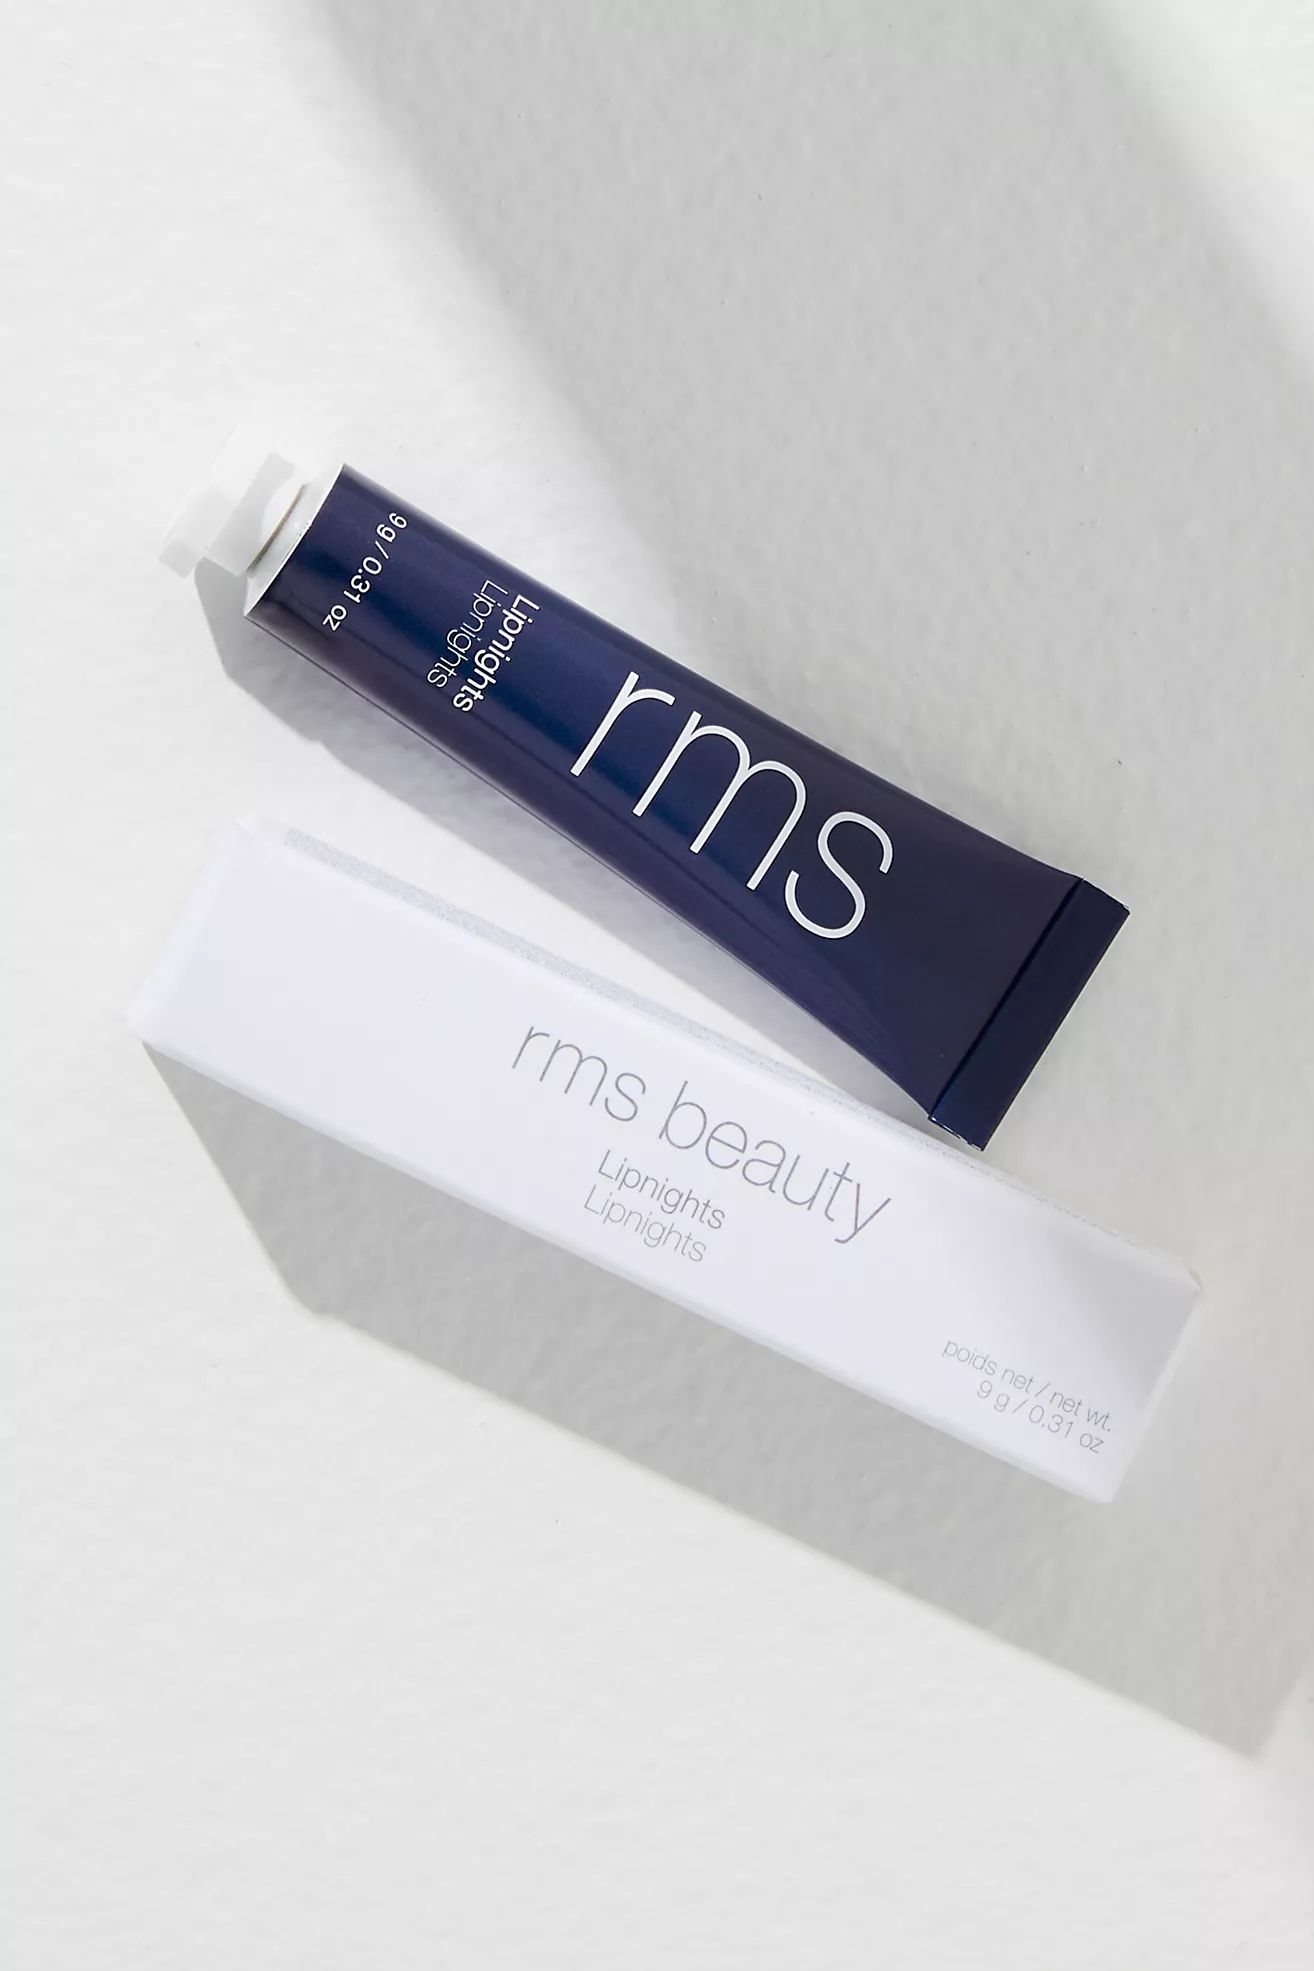 RMS Beauty Lipnights Overnight Lip Mask | Free People (Global - UK&FR Excluded)